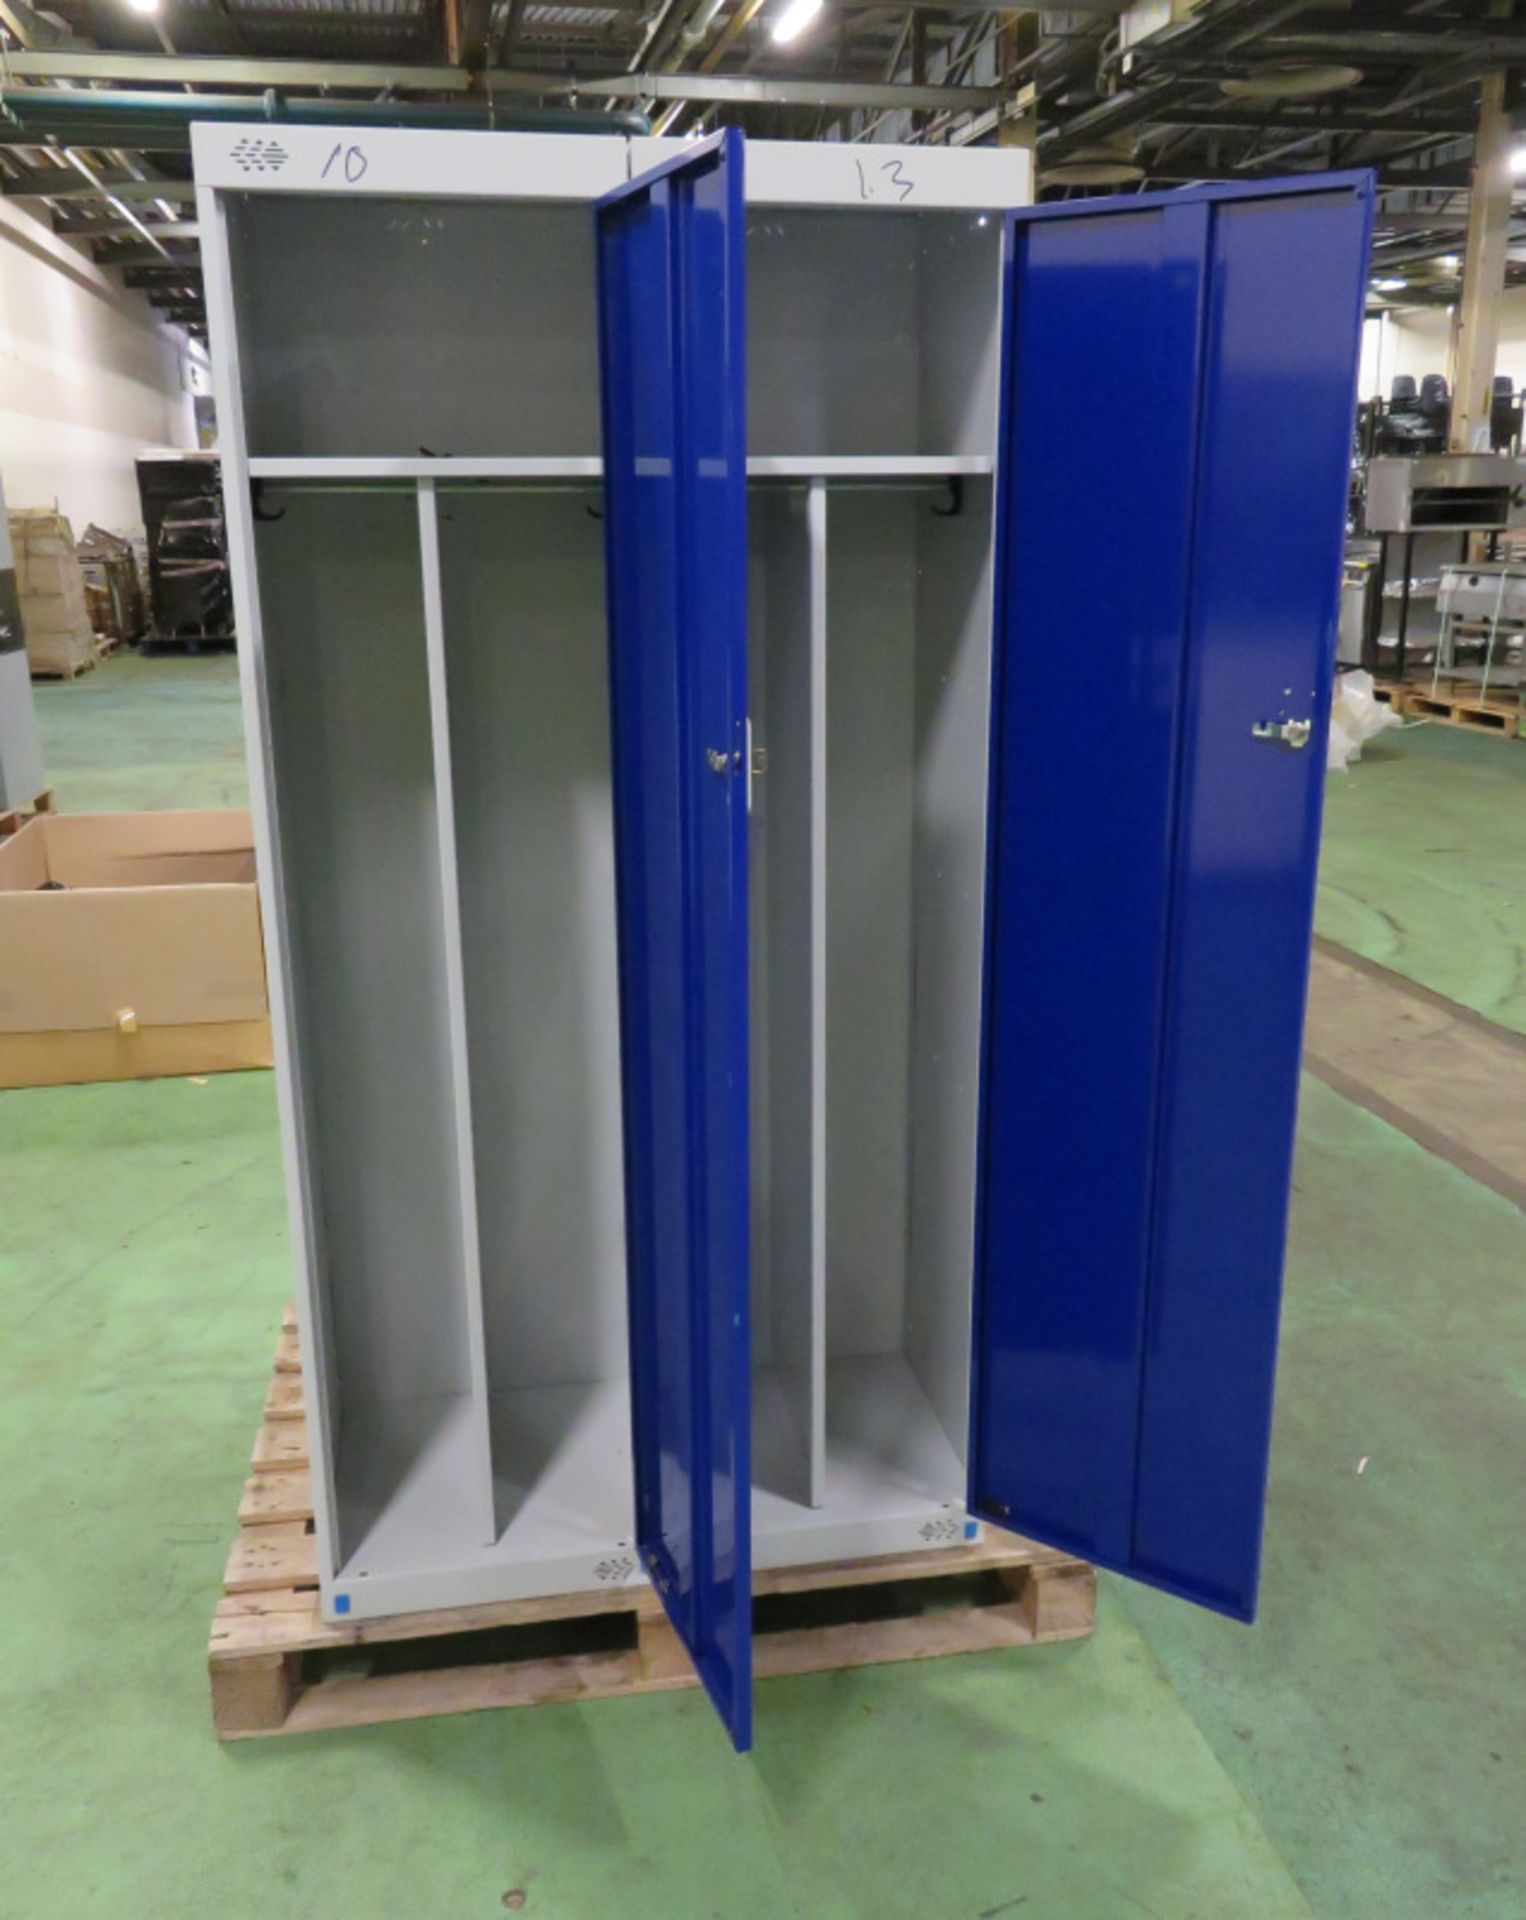 3x Metal Grey / Blue Lockers L 450mm x W 450mm x H1800mm - Image 3 of 6